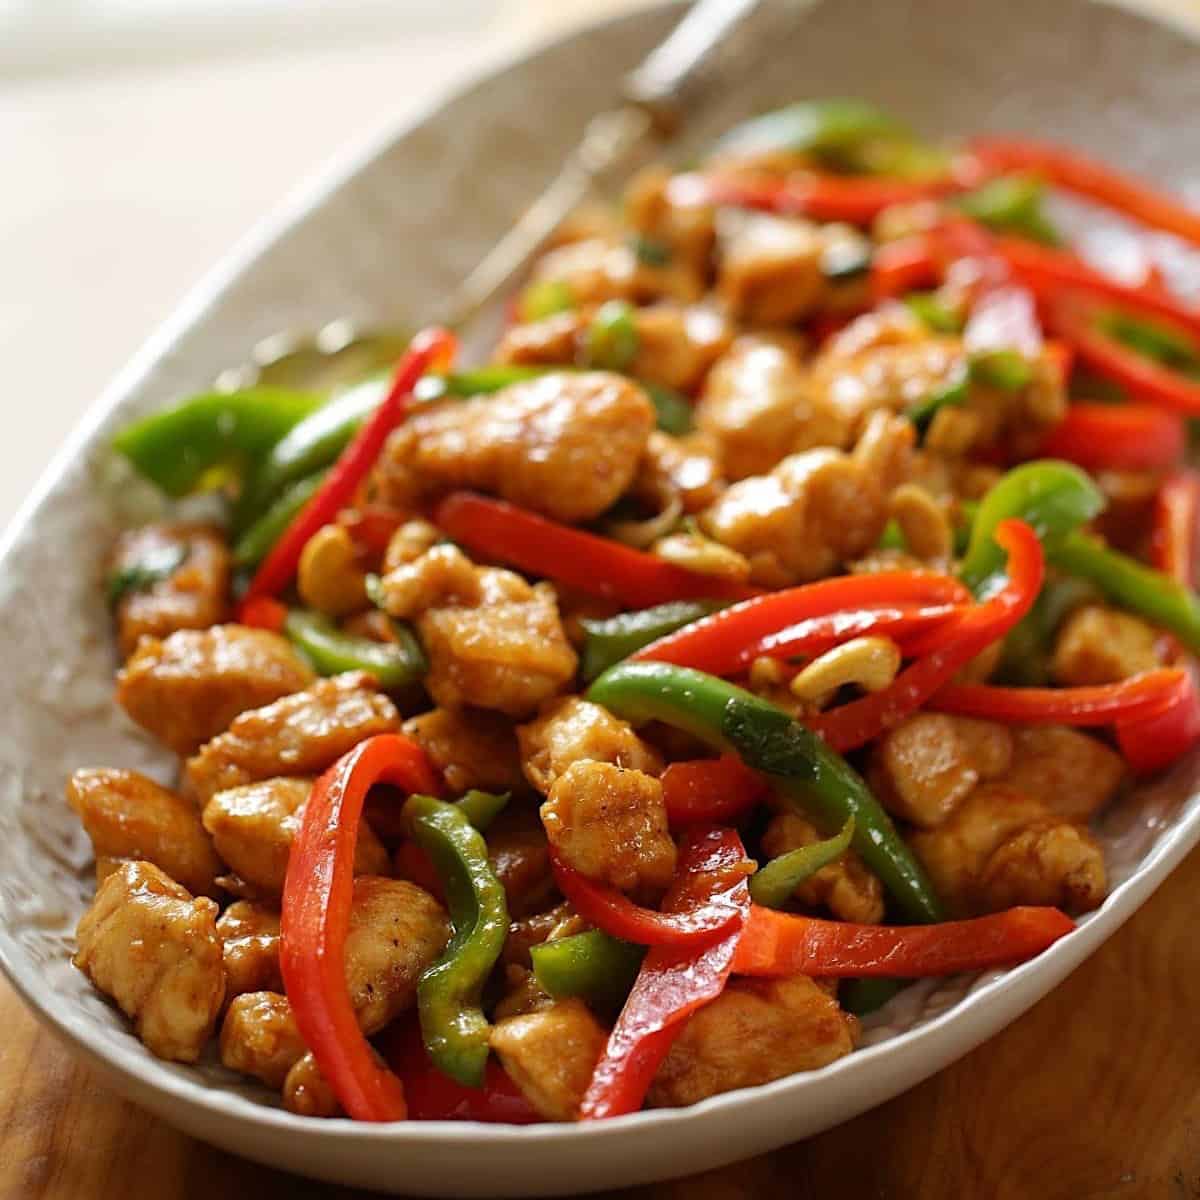 A platter of cashew chicken with peppers